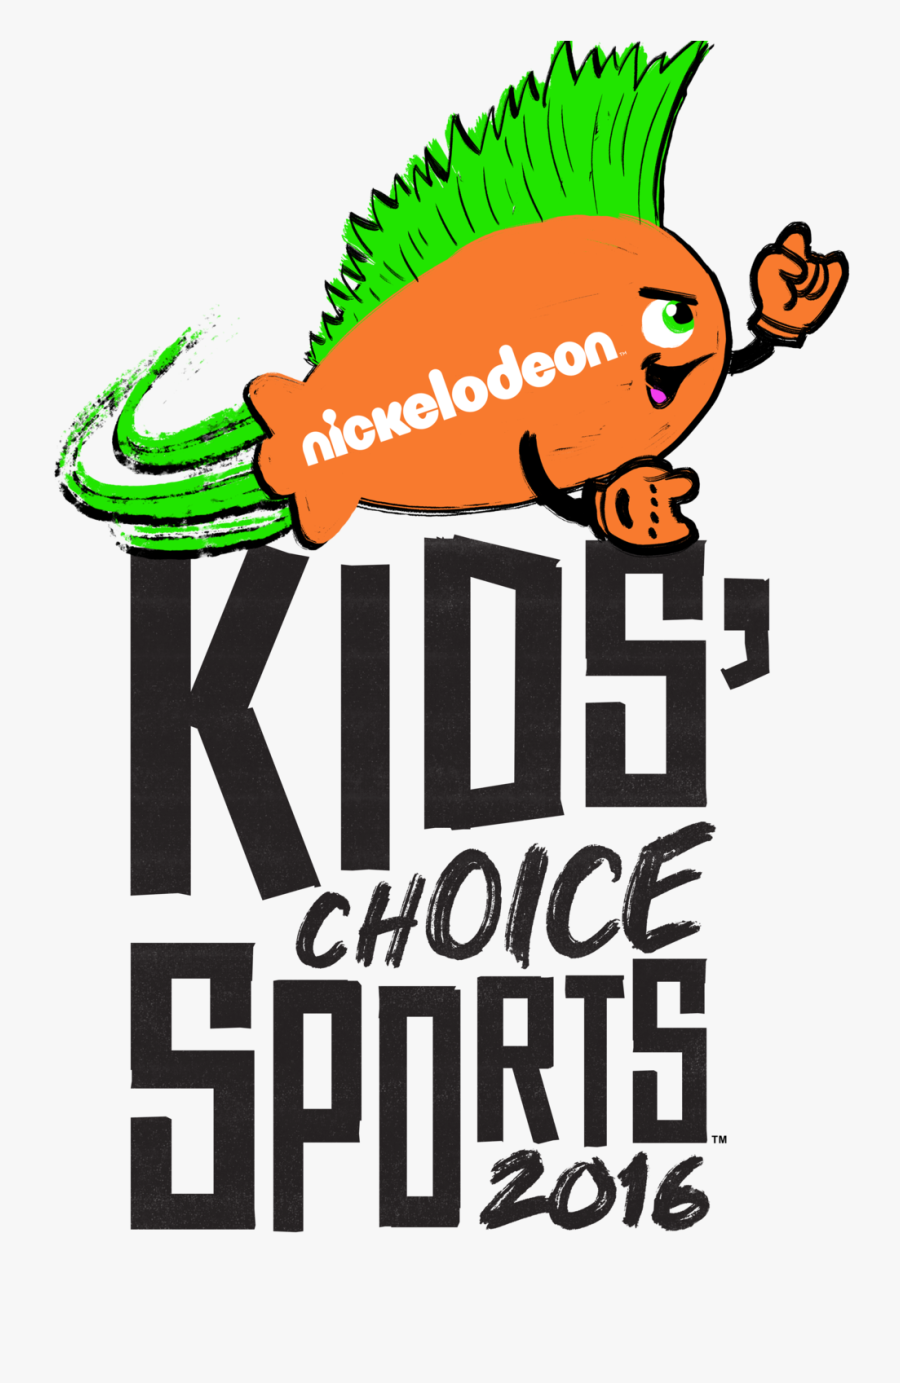 Nickelodeon"s Kids Choice Sports - Nickelodeon's Kids Choice Sports, Transparent Clipart